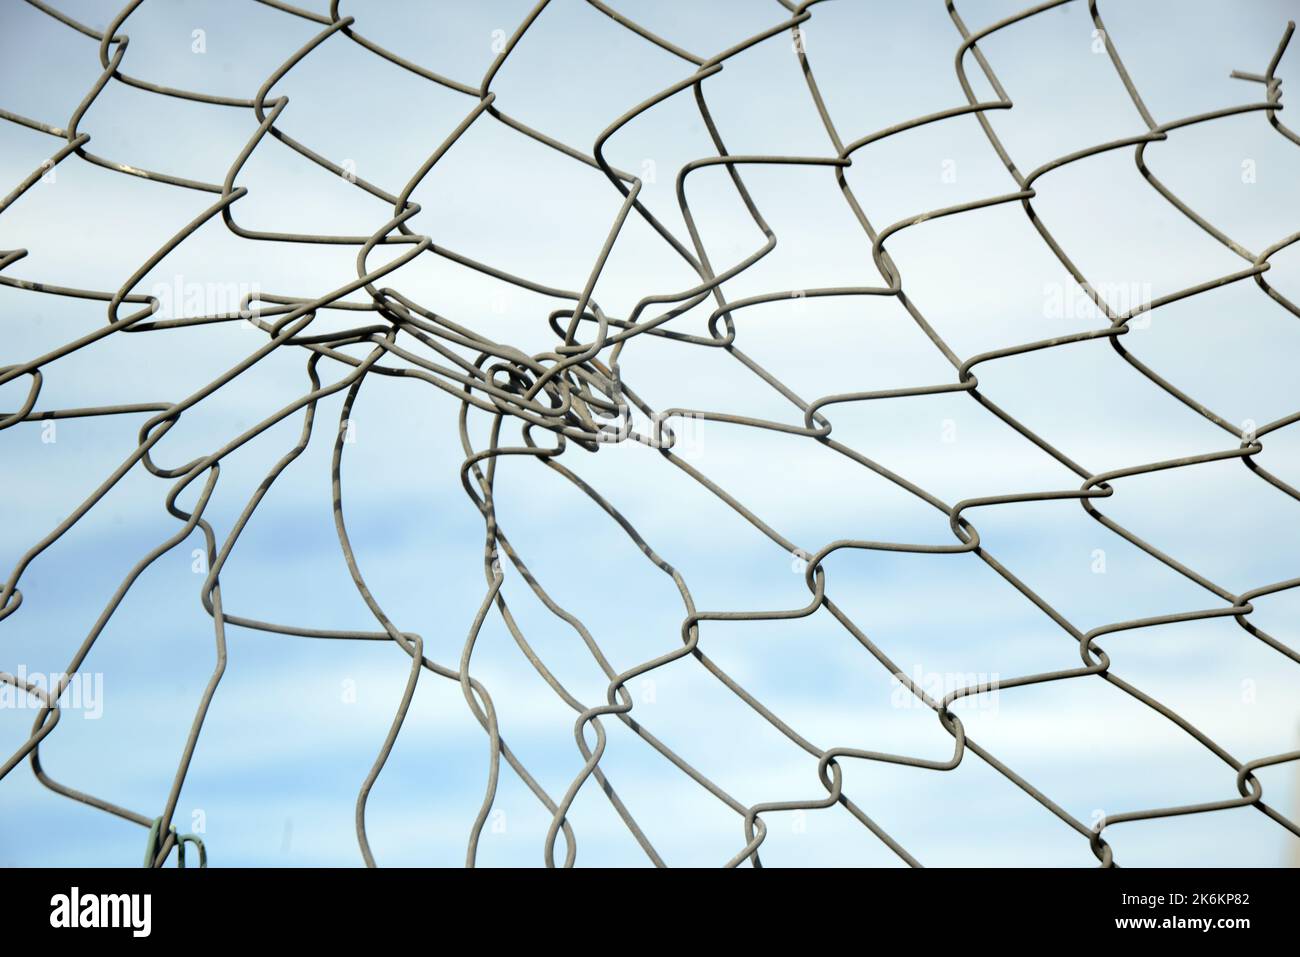 industrial background of twisted fence wire Stock Photo